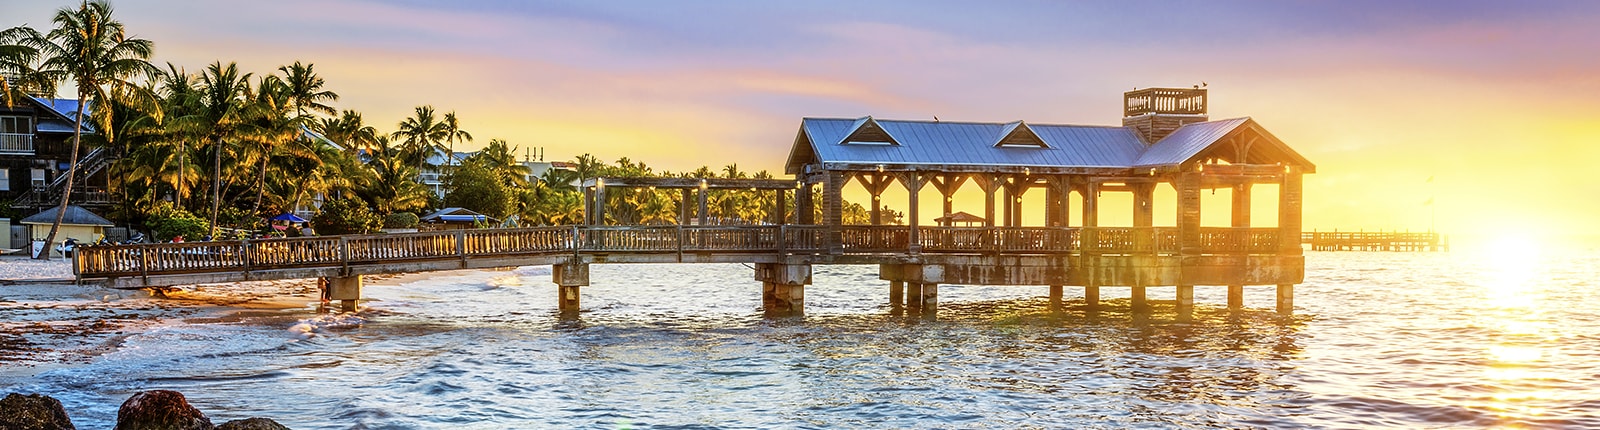 Gorgeous pier during sunset in Key West